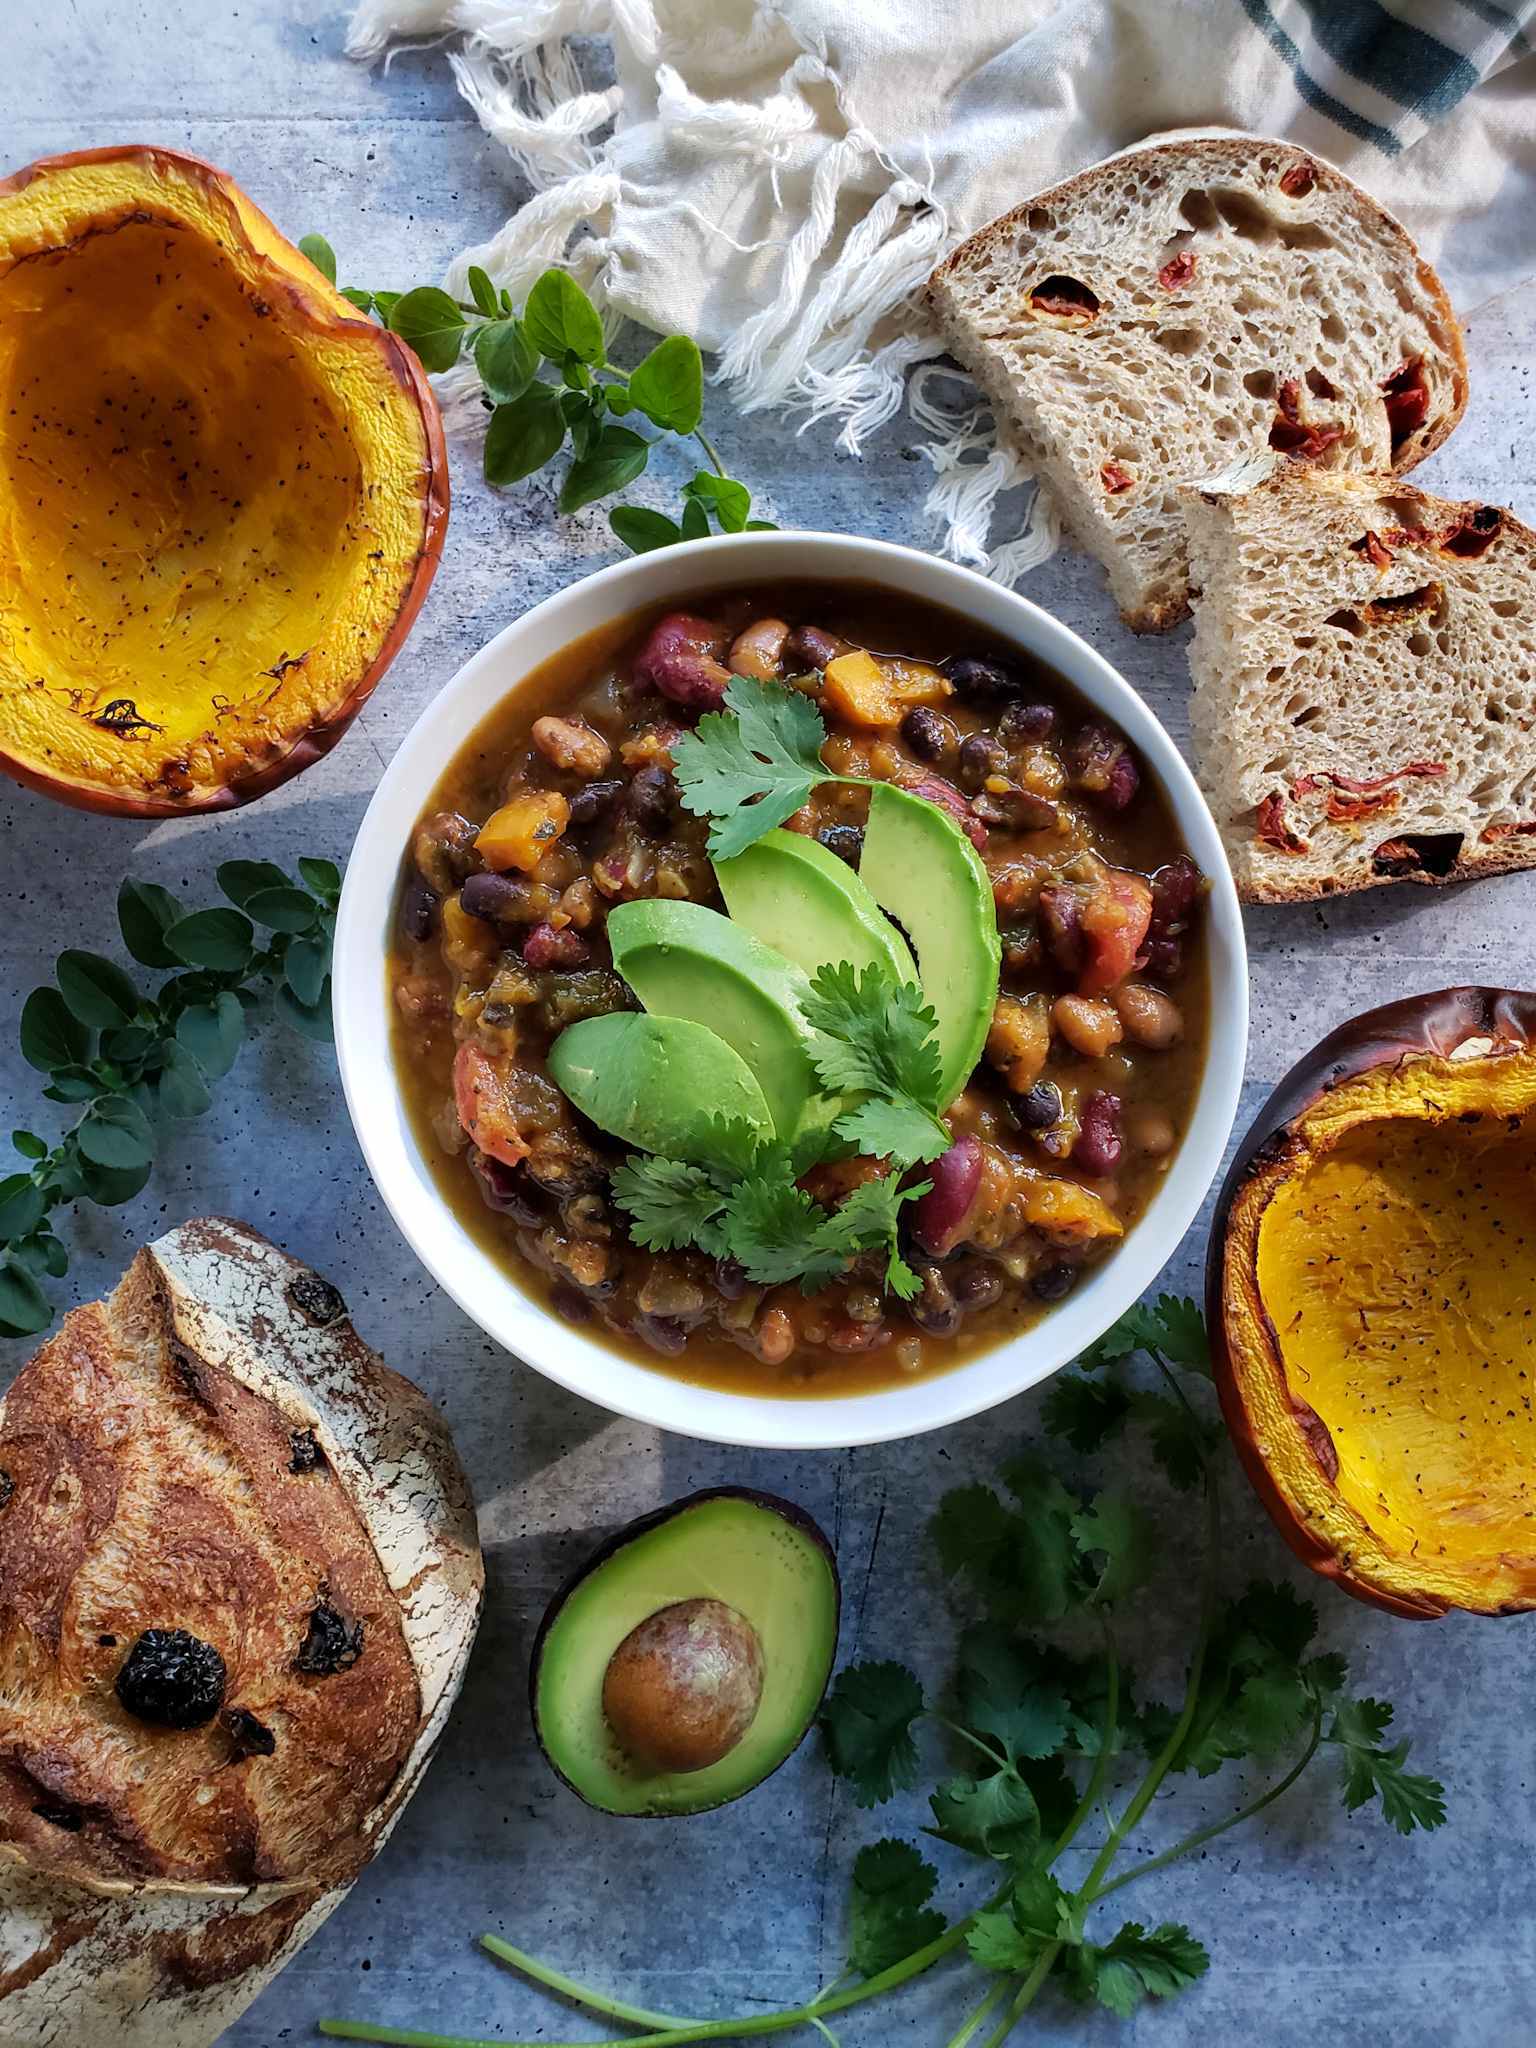 The roasted pumpkin chili is shown garnished with avocado slices and cilantro leaves. Surrounding the bowl in a decorative fashion are halves of roasted pumpkin, slices of sourdough bread as well as half of the remaining loaf, half an avocado, sprigs of cilantro, and sprigs of oregano. 